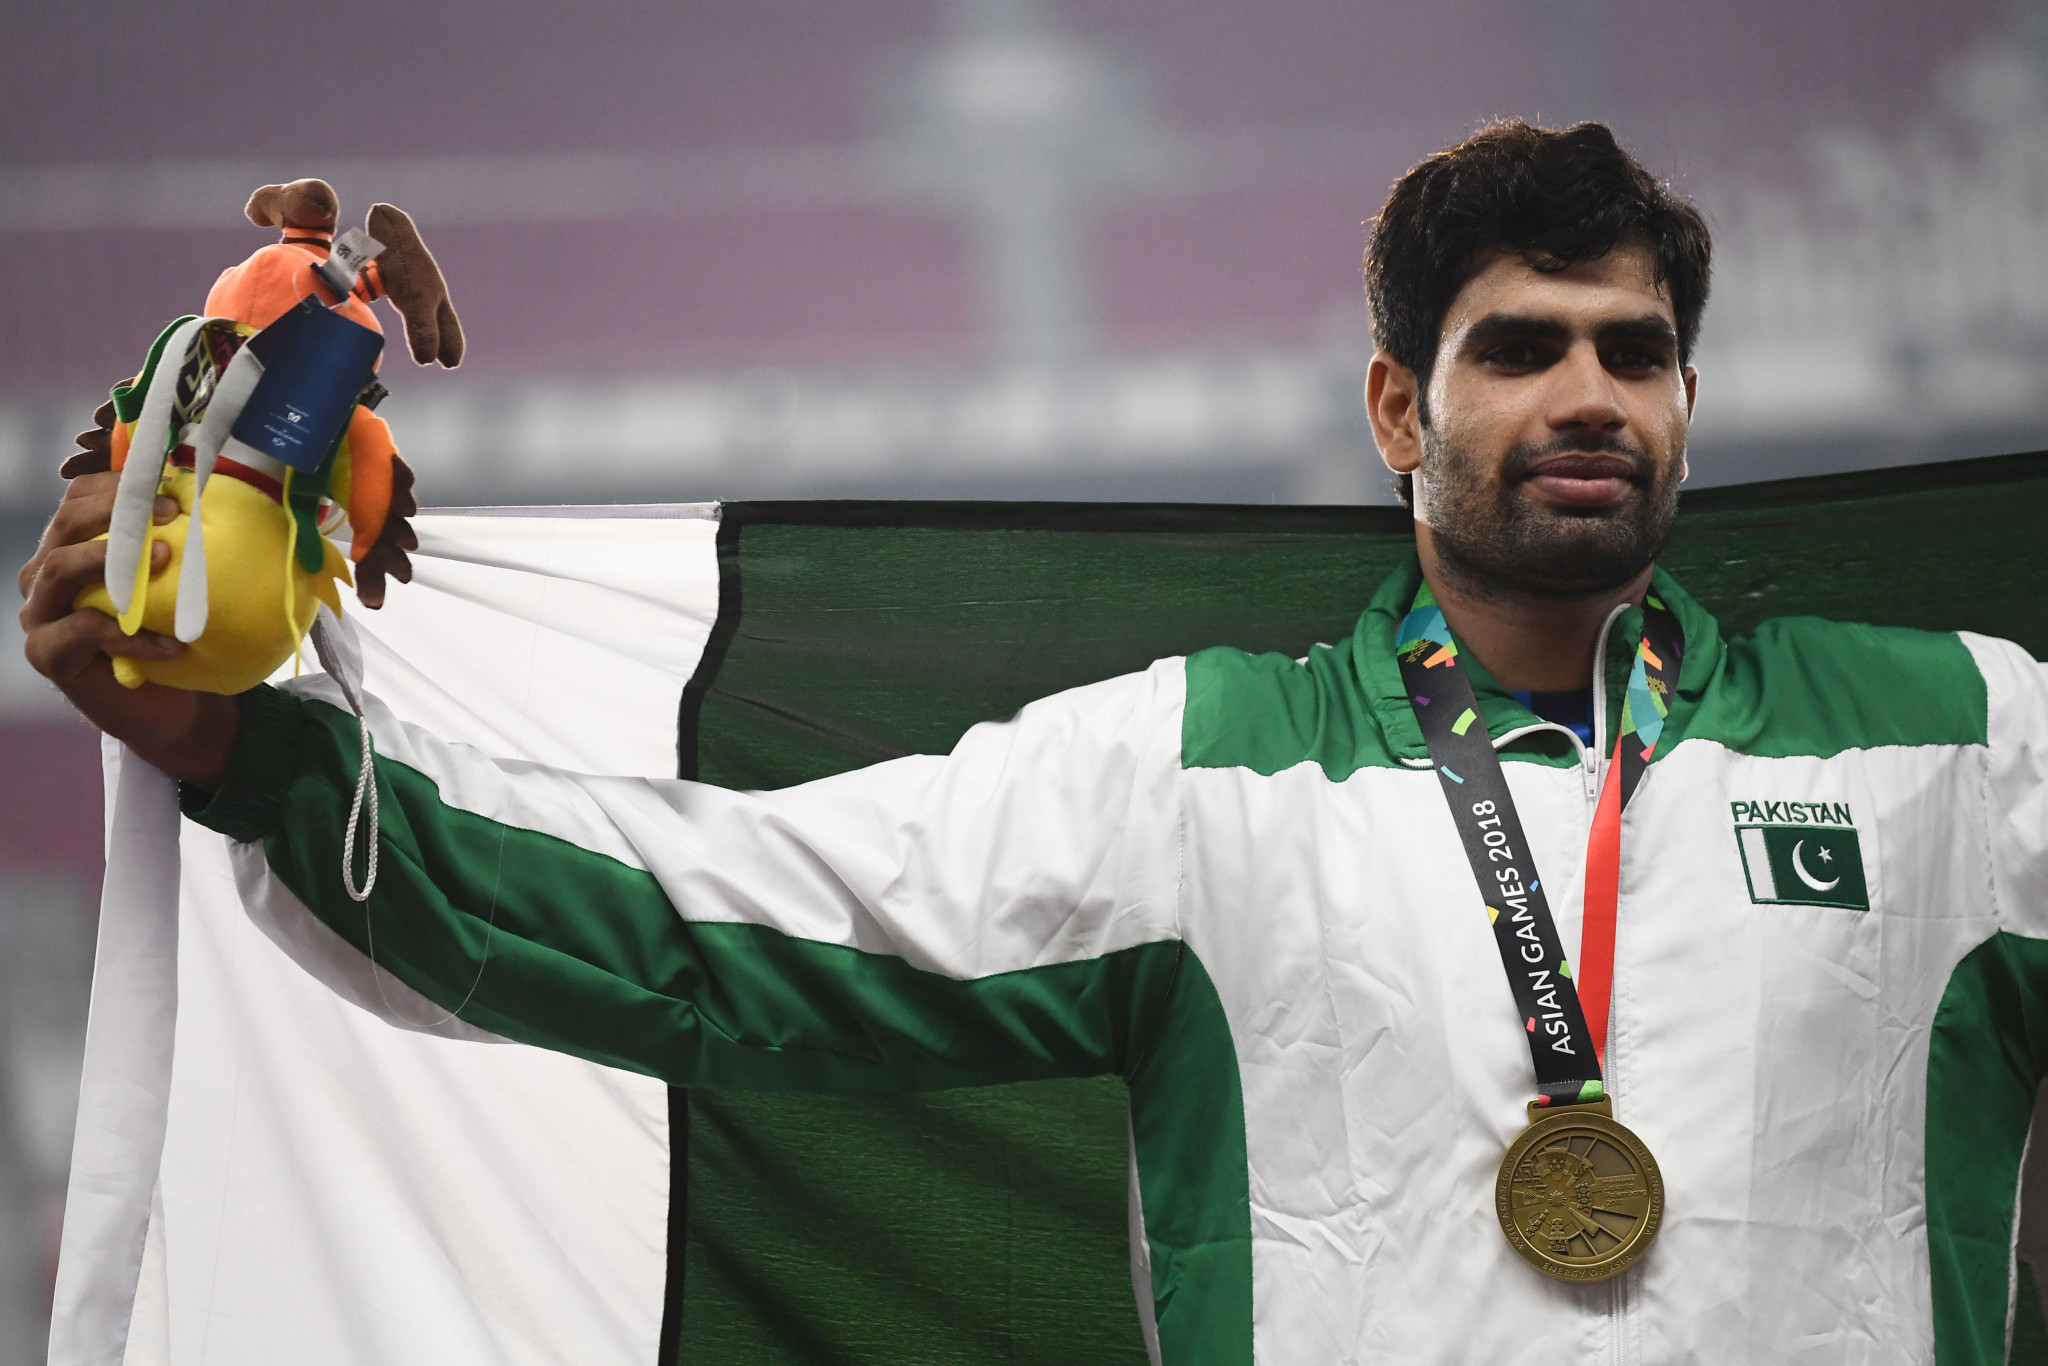 Arshad Nadeem was one of Pakistan's four bronze medallists at the 2018 Asian Games, with his medal coming in the men's javelin throw ©Getty Images  